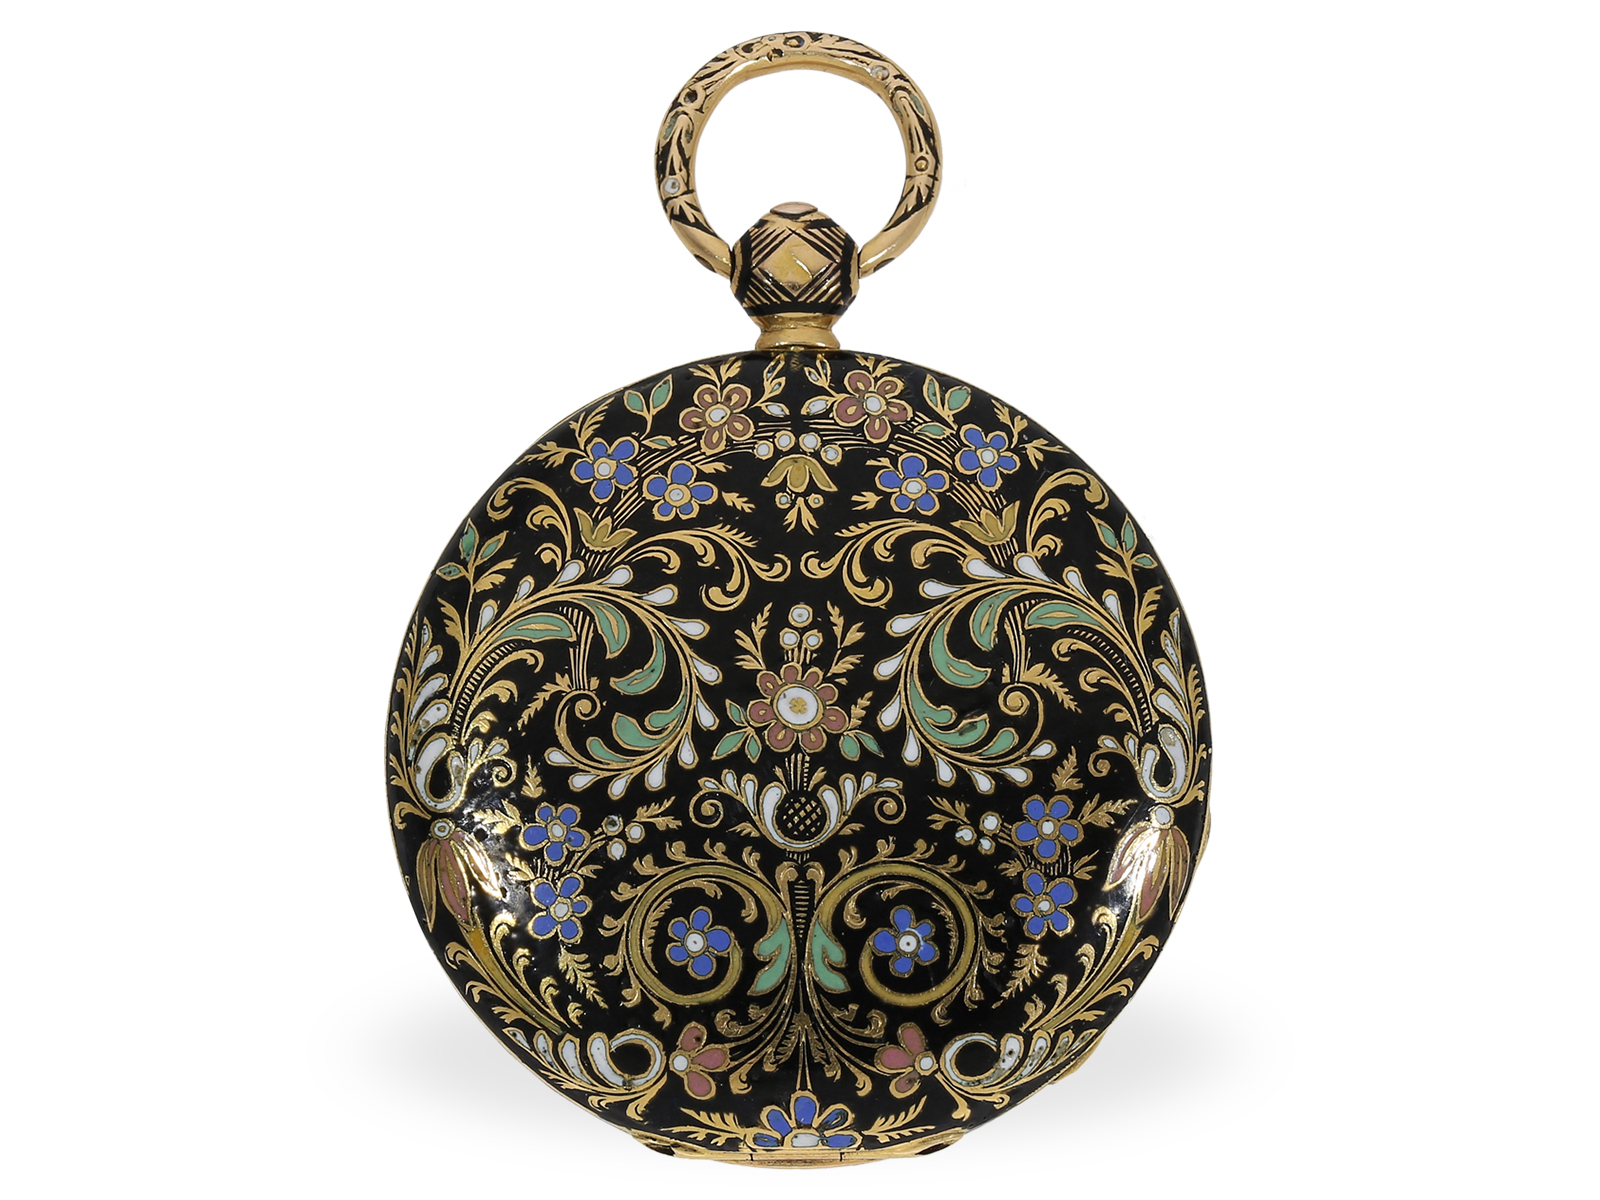 Pocket watch: excellently preserved gold/enamel lepine with decentral dial, ca. 1820